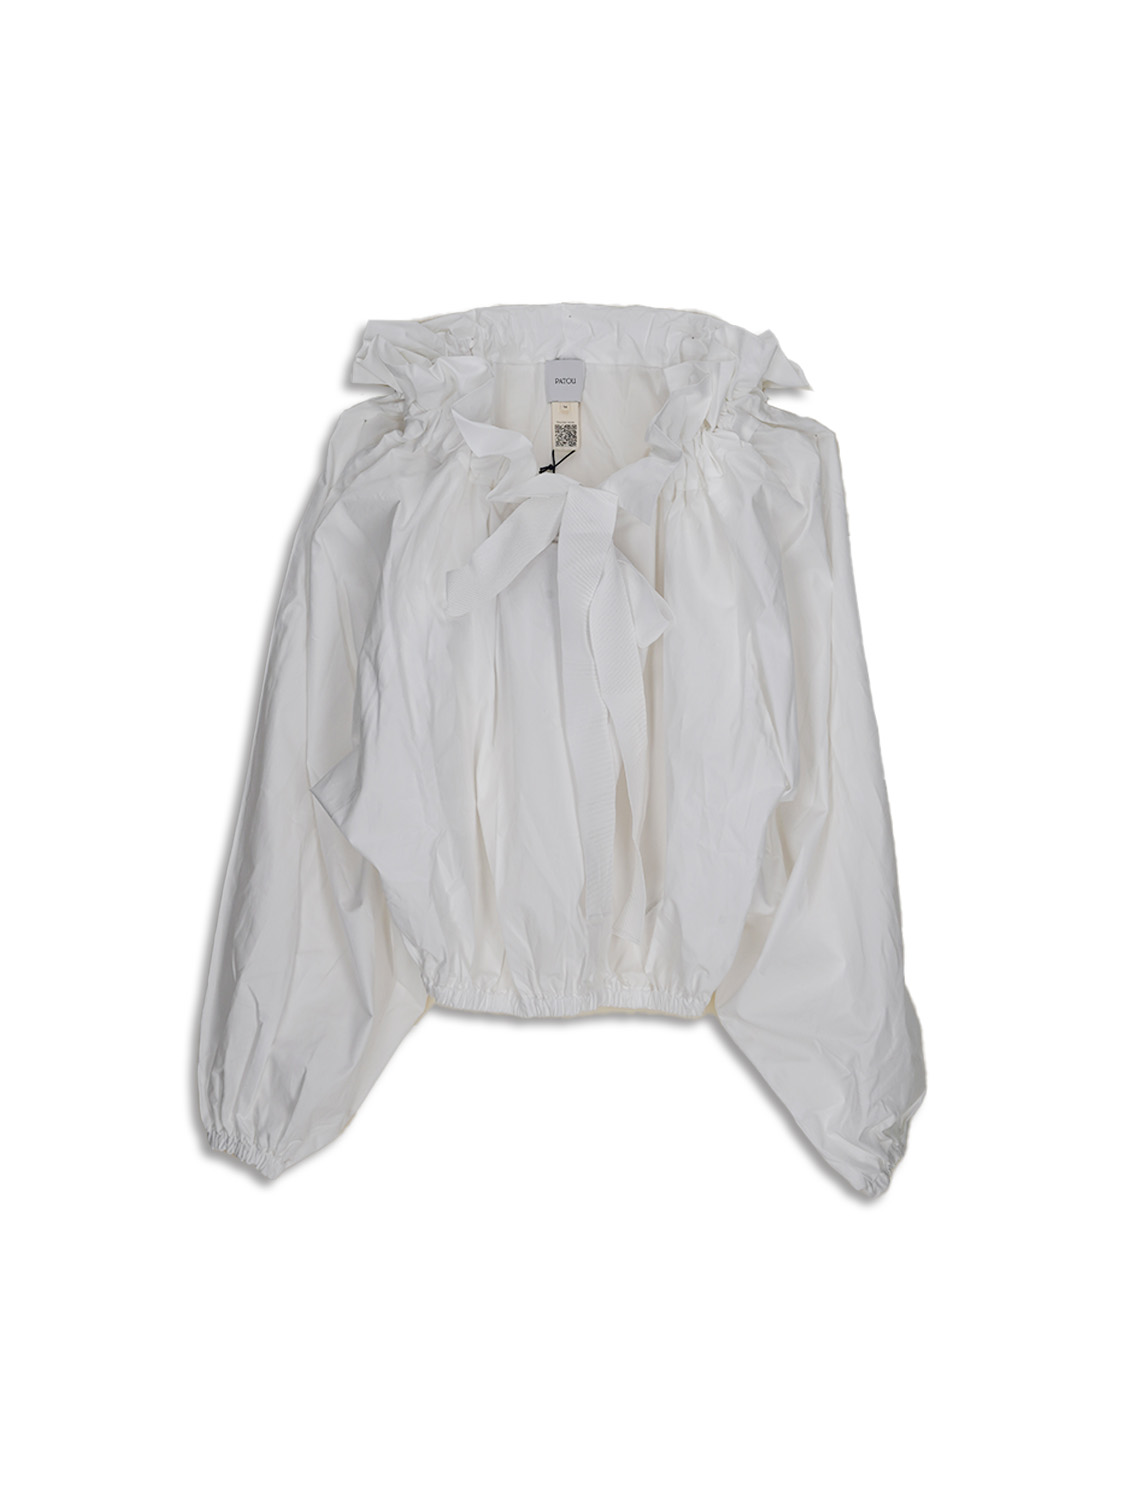 Gros Grain - Oversized blouse with ruffle collar